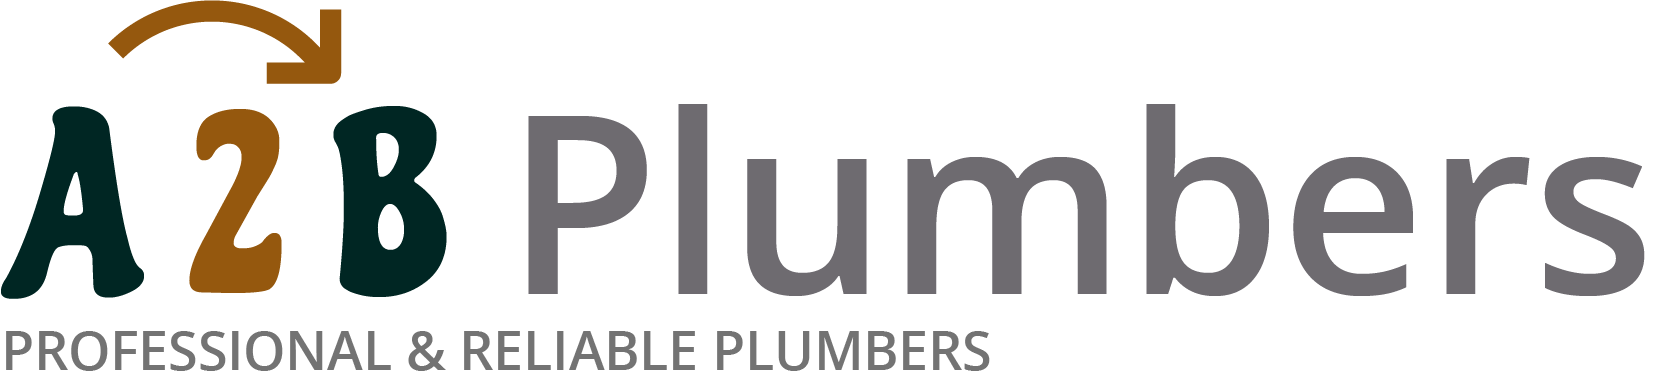 If you need a boiler installed, a radiator repaired or a leaking tap fixed, call us now - we provide services for properties in Burbage and the local area.